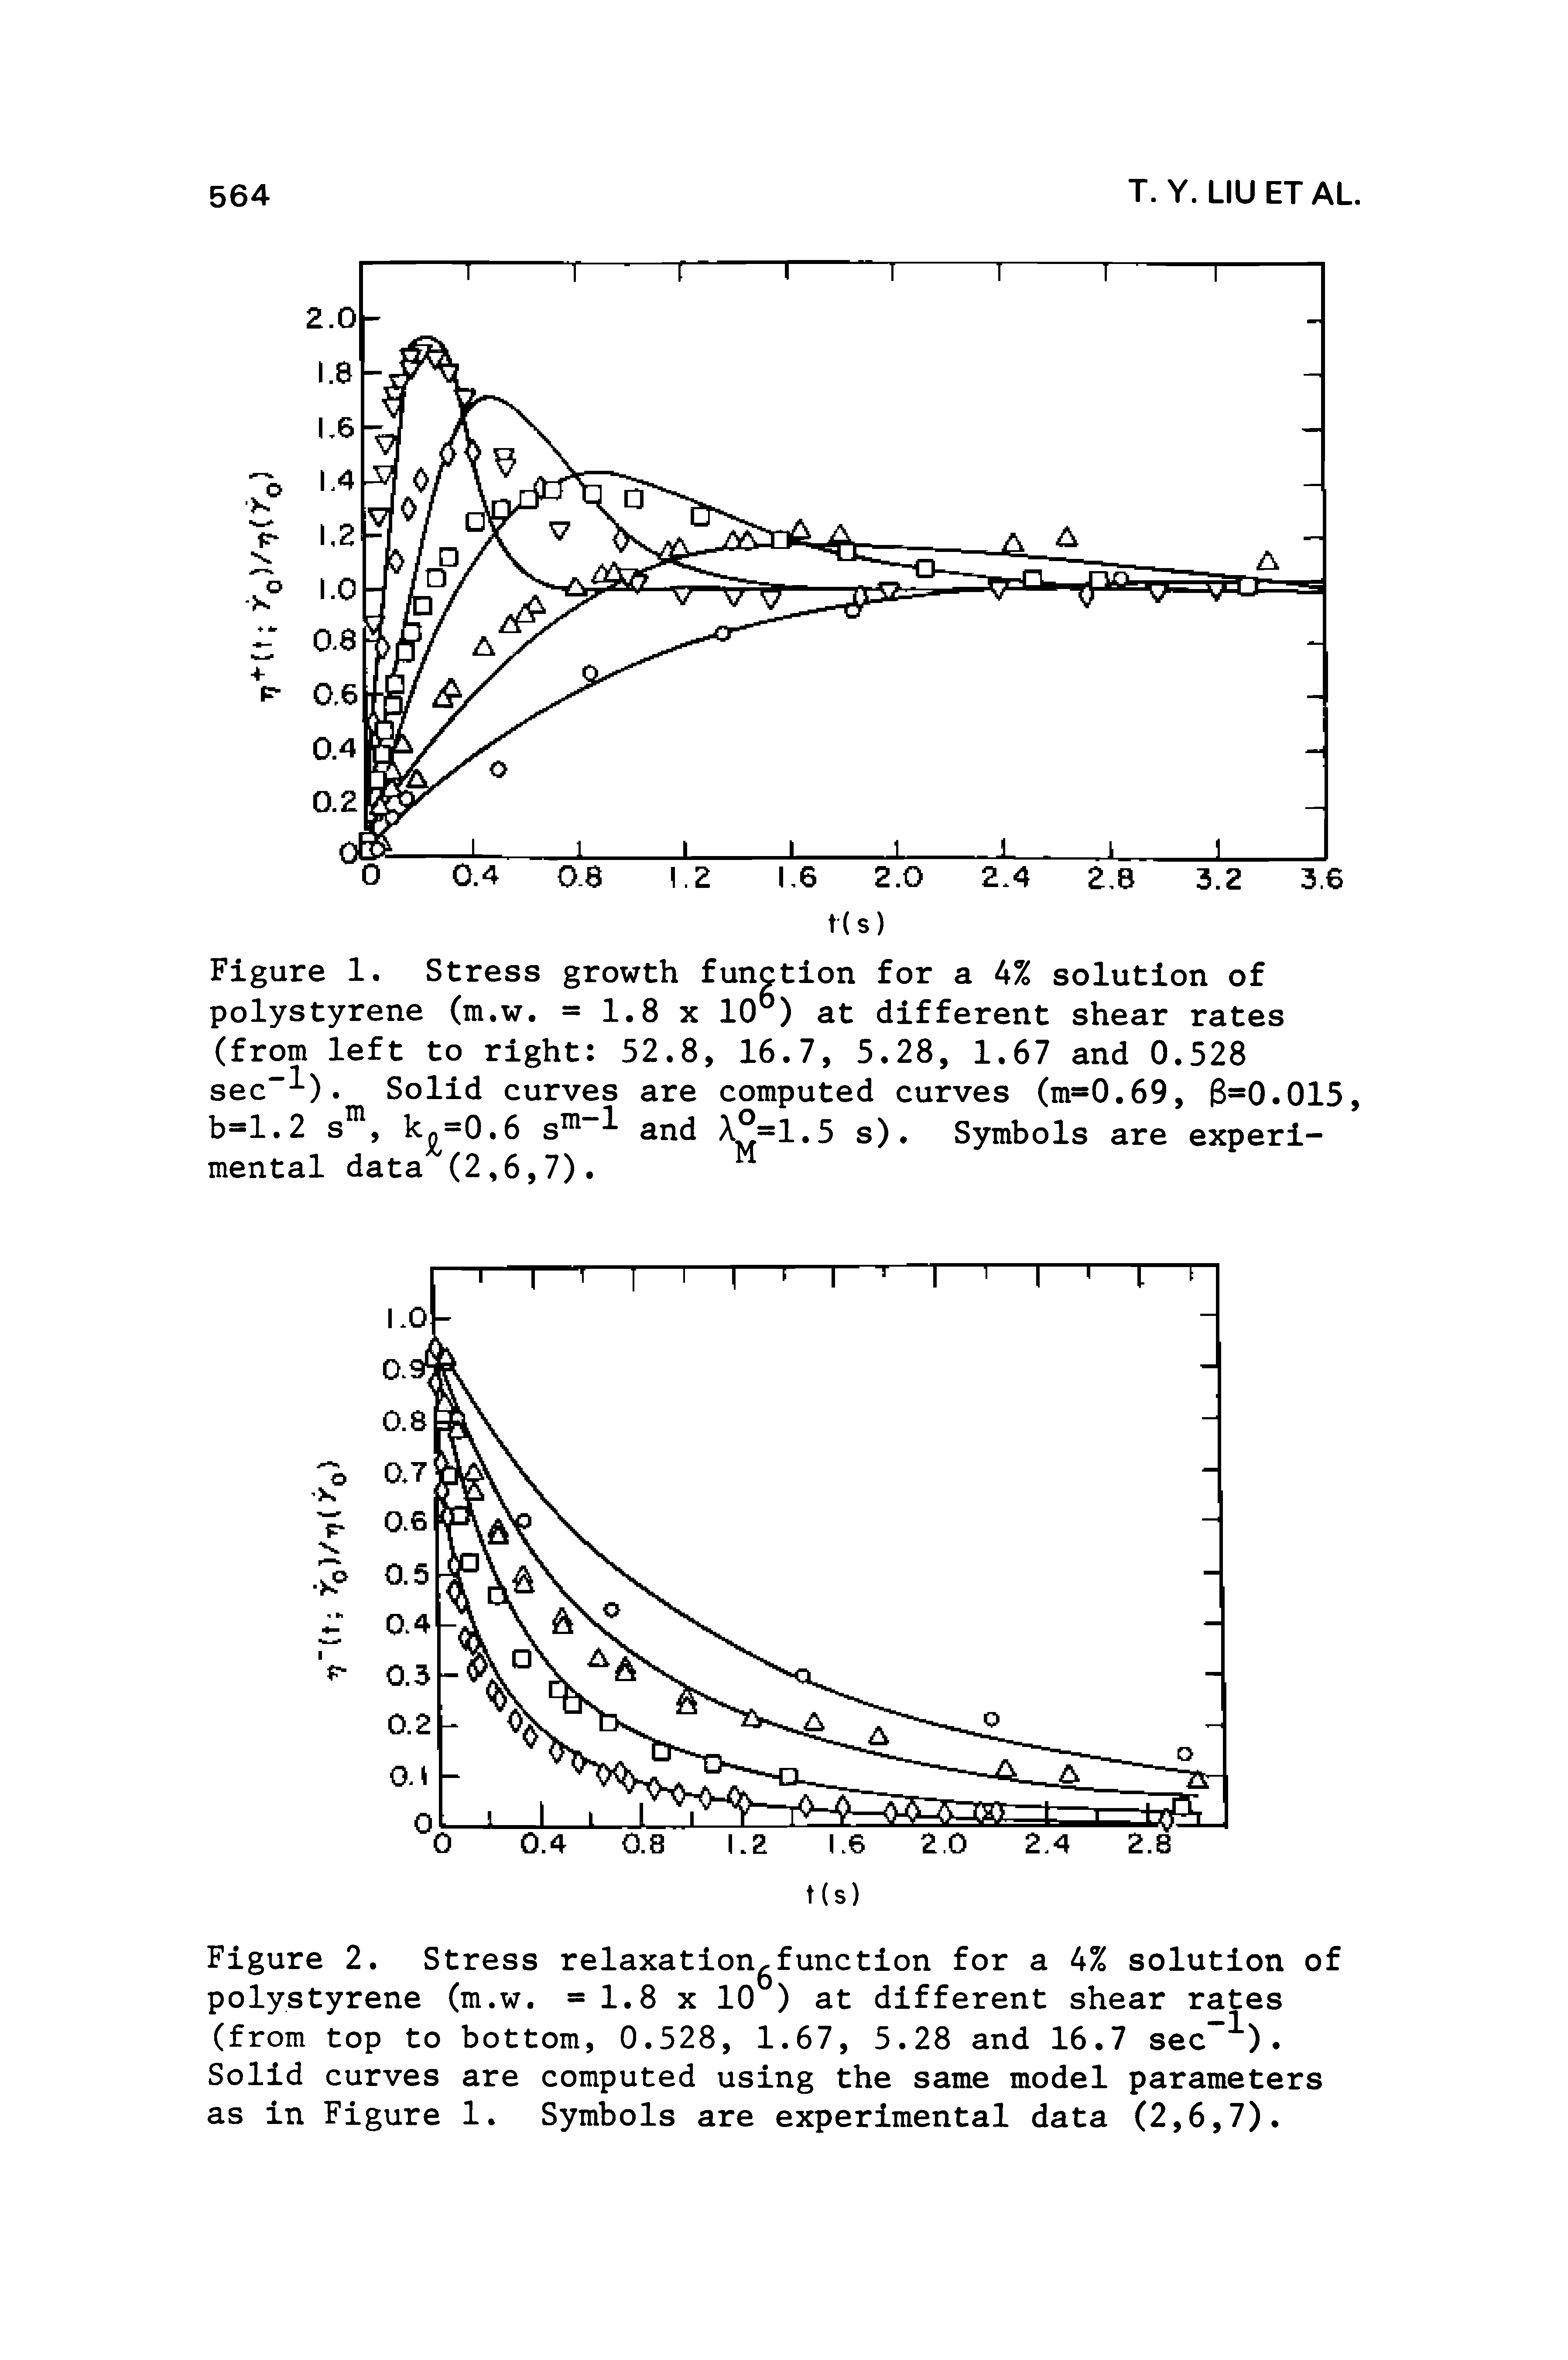 Figure 2. Stress relaxation function for a 4% solution of polystyrene (m.w. = 1.8 x 10 ) at different shear rates (from top to bottom, 0.528, 1.67, 5.28 and 16.7 sec ). Solid curves are computed using the same model parameters as in Figure 1. Symbols are experimental data (2,6,7).